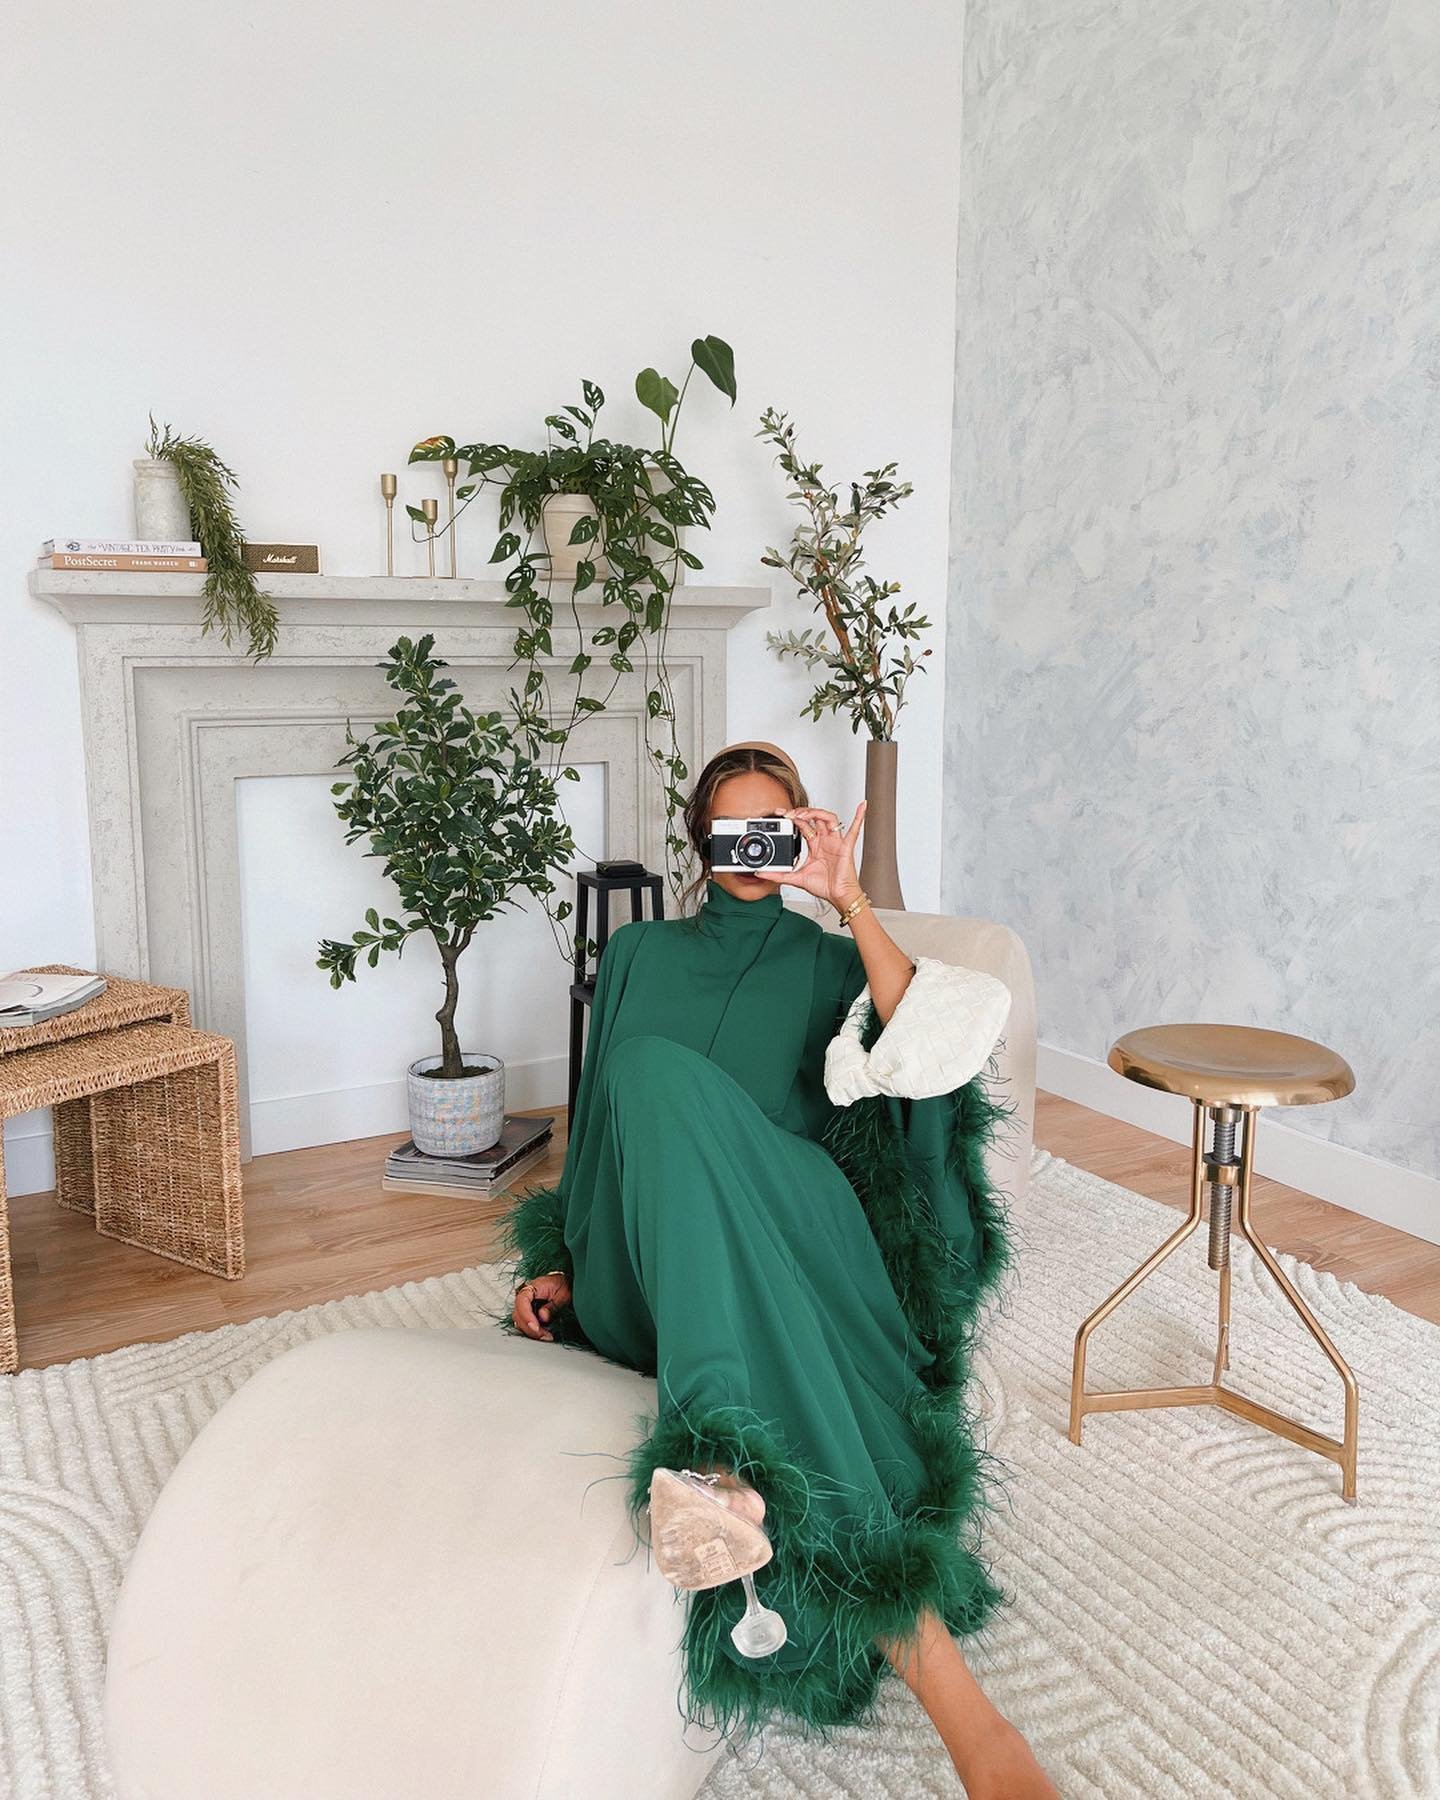 @zaheee22 stuns in her elegant emerald green feathered vintage dress